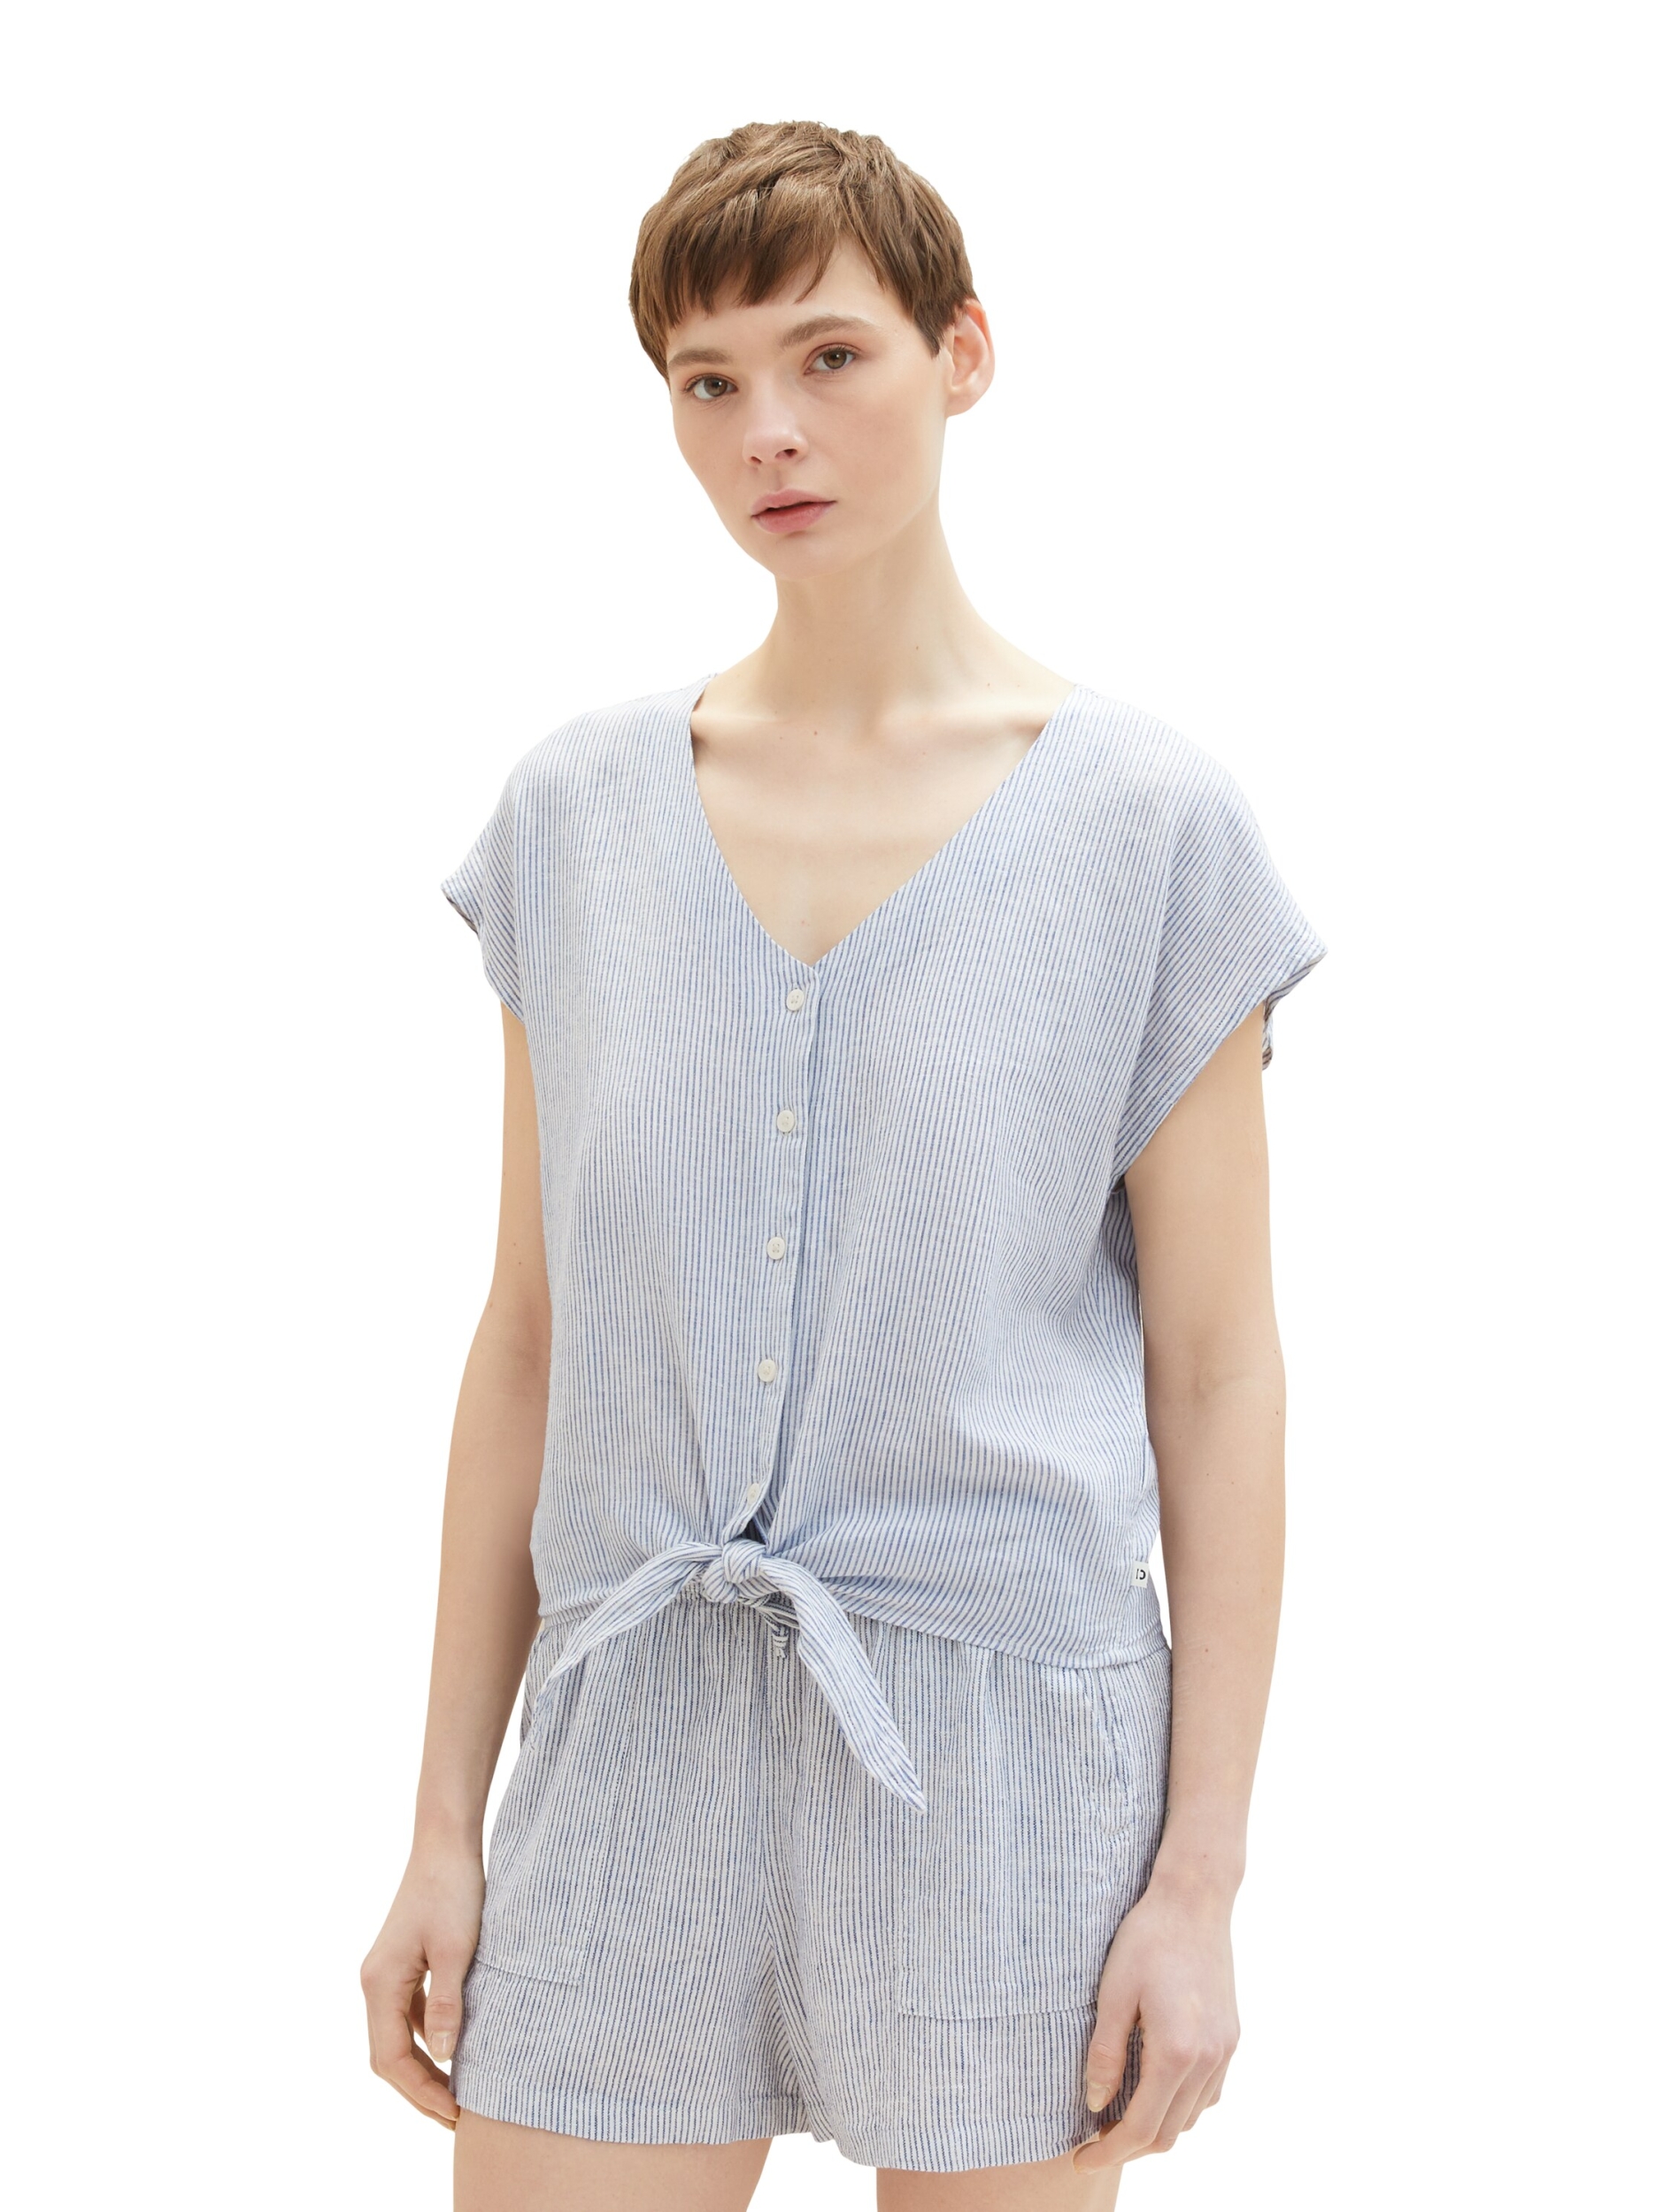 Bluse linen mix shirt with knot